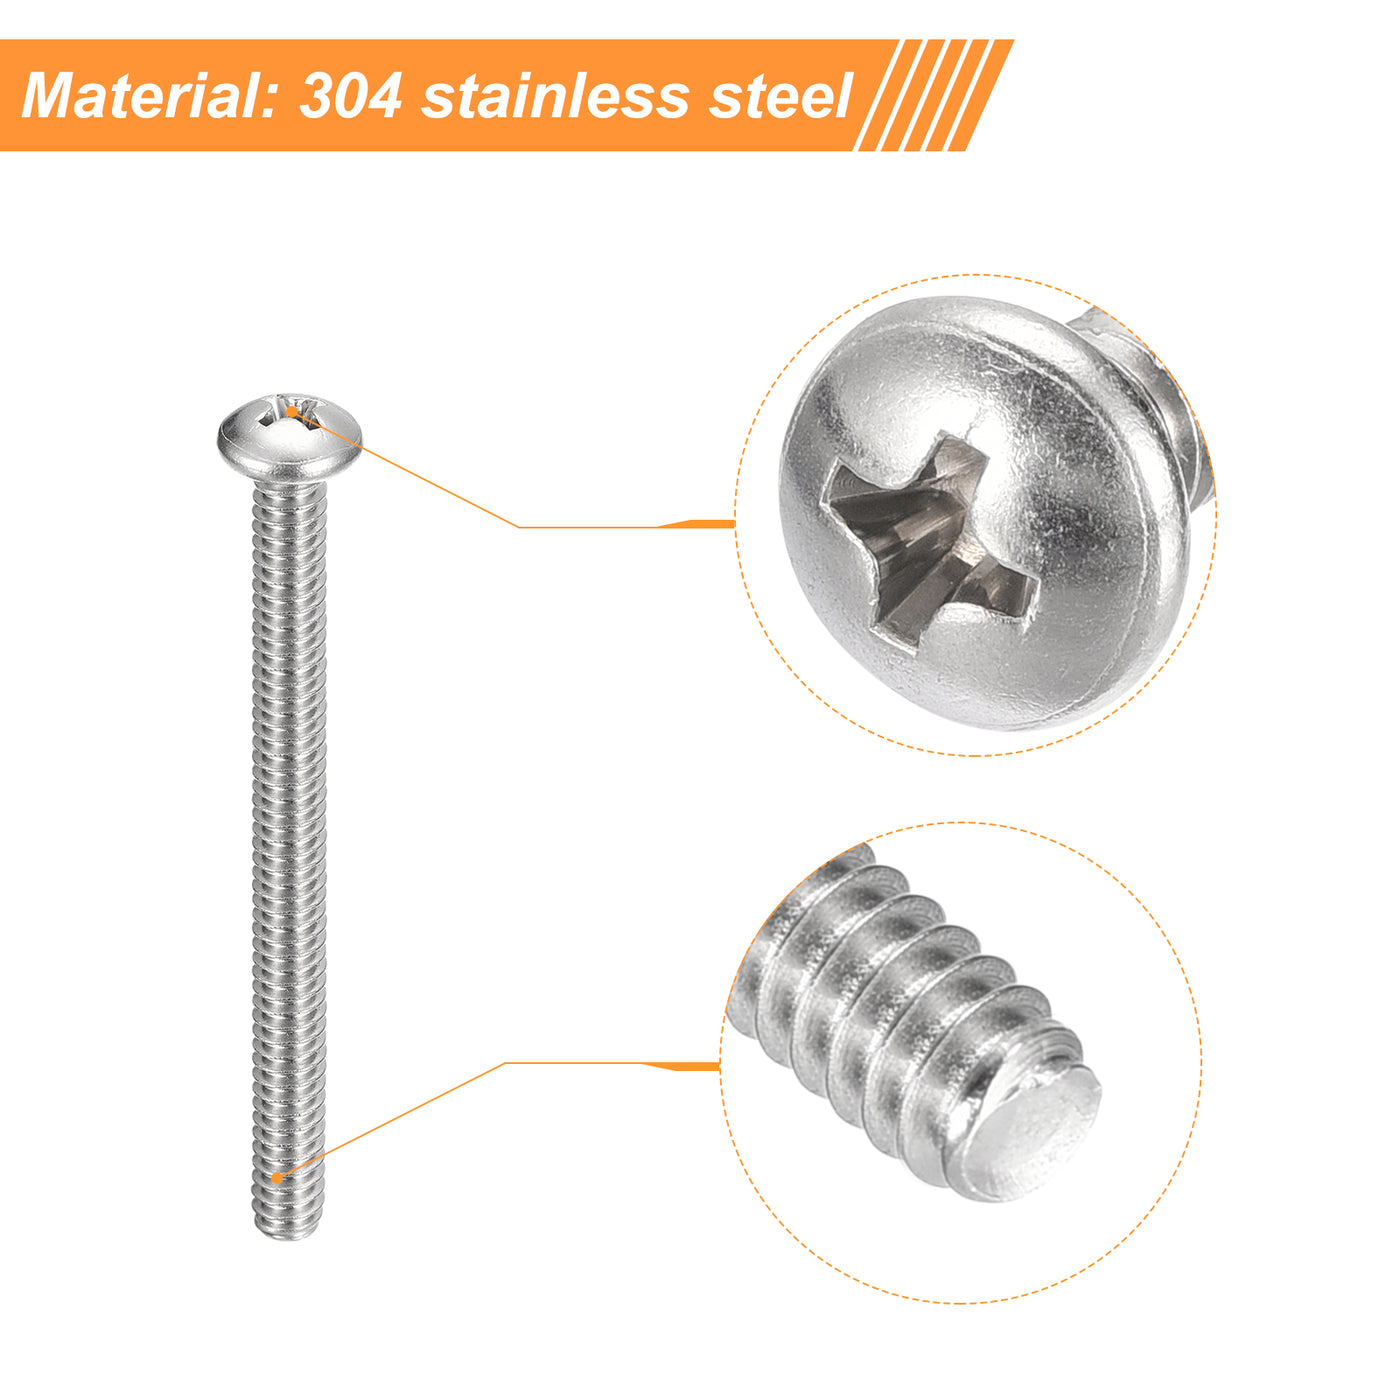 uxcell Uxcell #10-24x2-1/4" Pan Head Machine Screws, Stainless Steel 18-8 Screw, Pack of 10